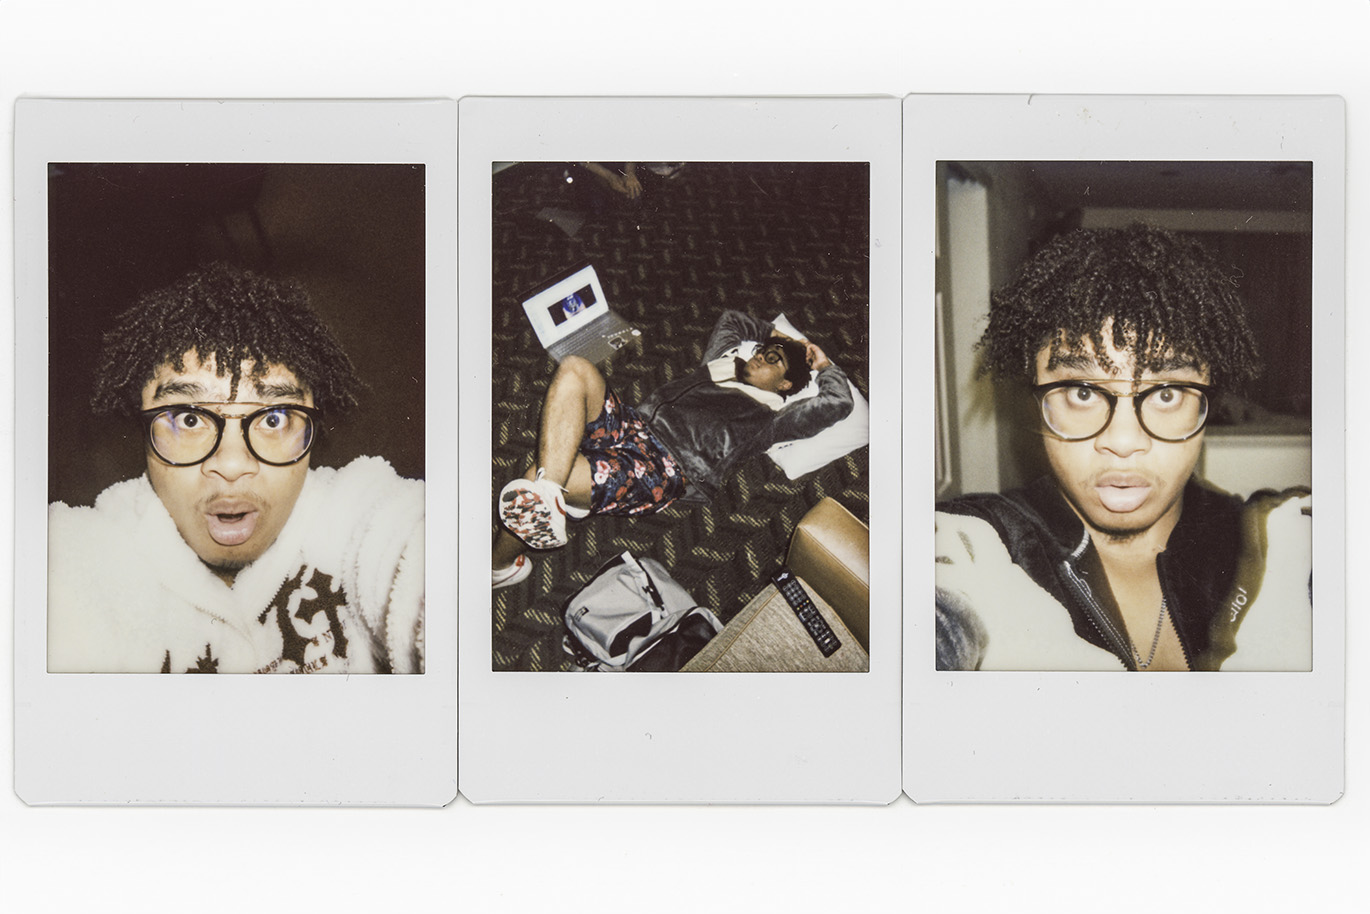 Set of three scanned polaroid photos showing a young African American college student.